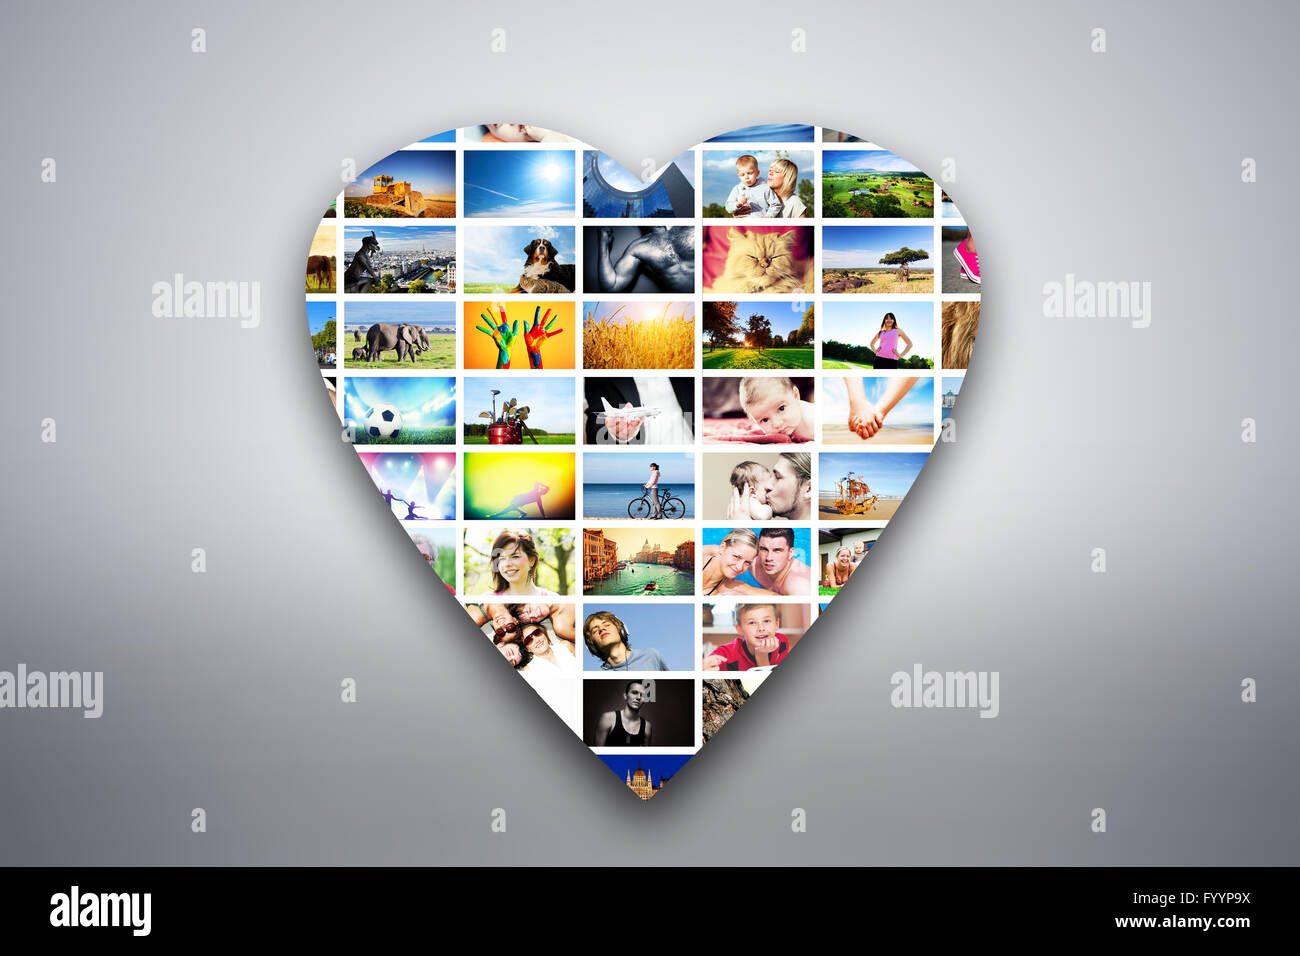 Heart design element made of pictures Stock Photo